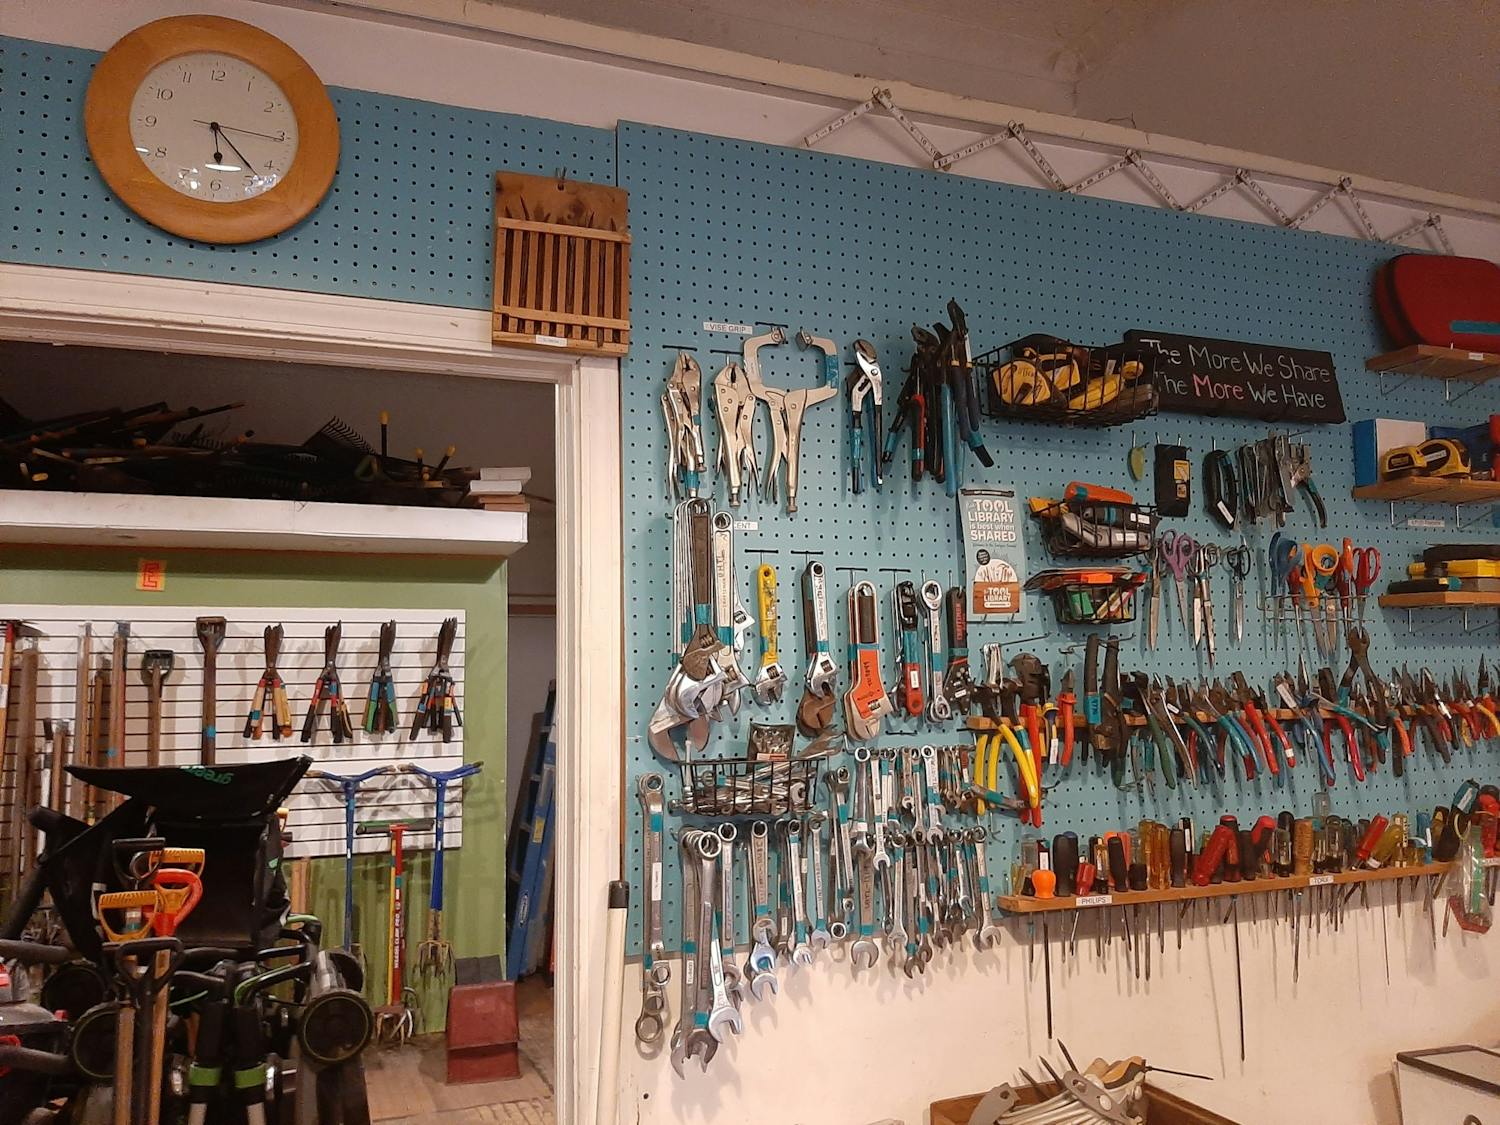 Located just 10 minutes from South Campus on West Northrup, the Tool Library allows members to borrow a variety of tools for $30 a year.